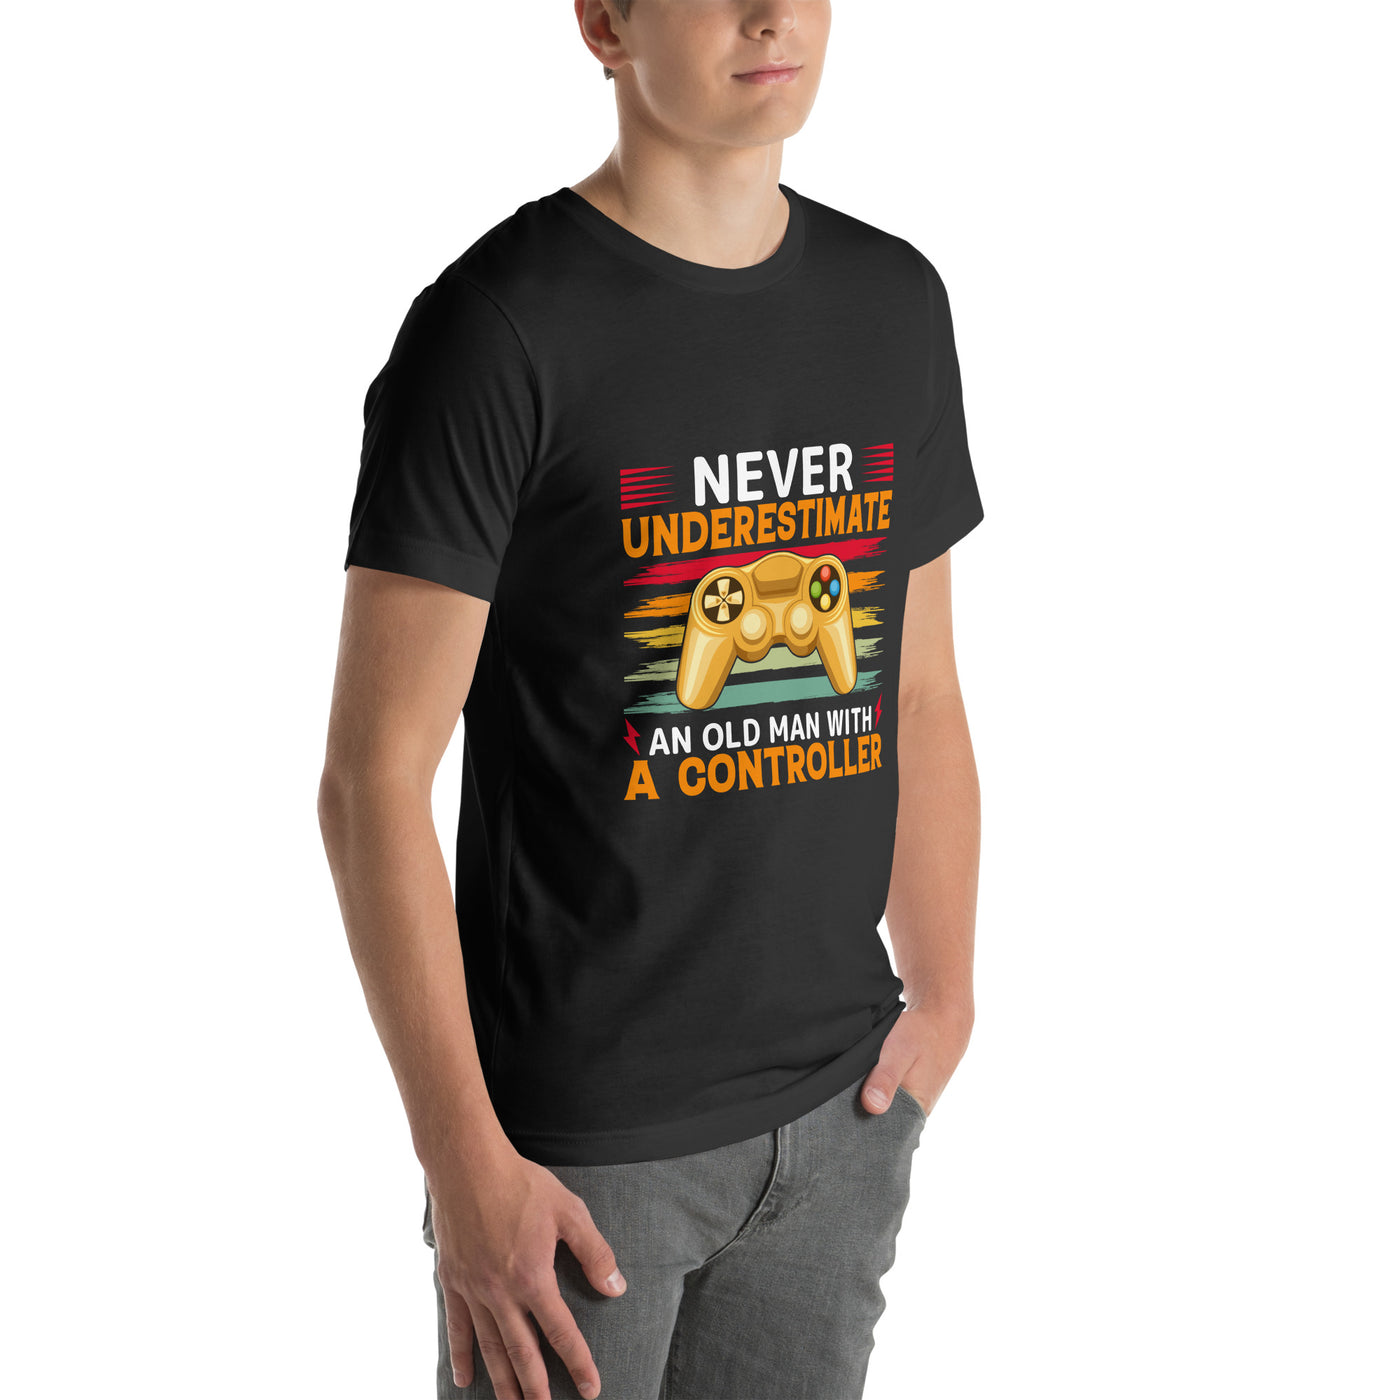 Never Underestimate an old man with a controller - Unisex t-shirt